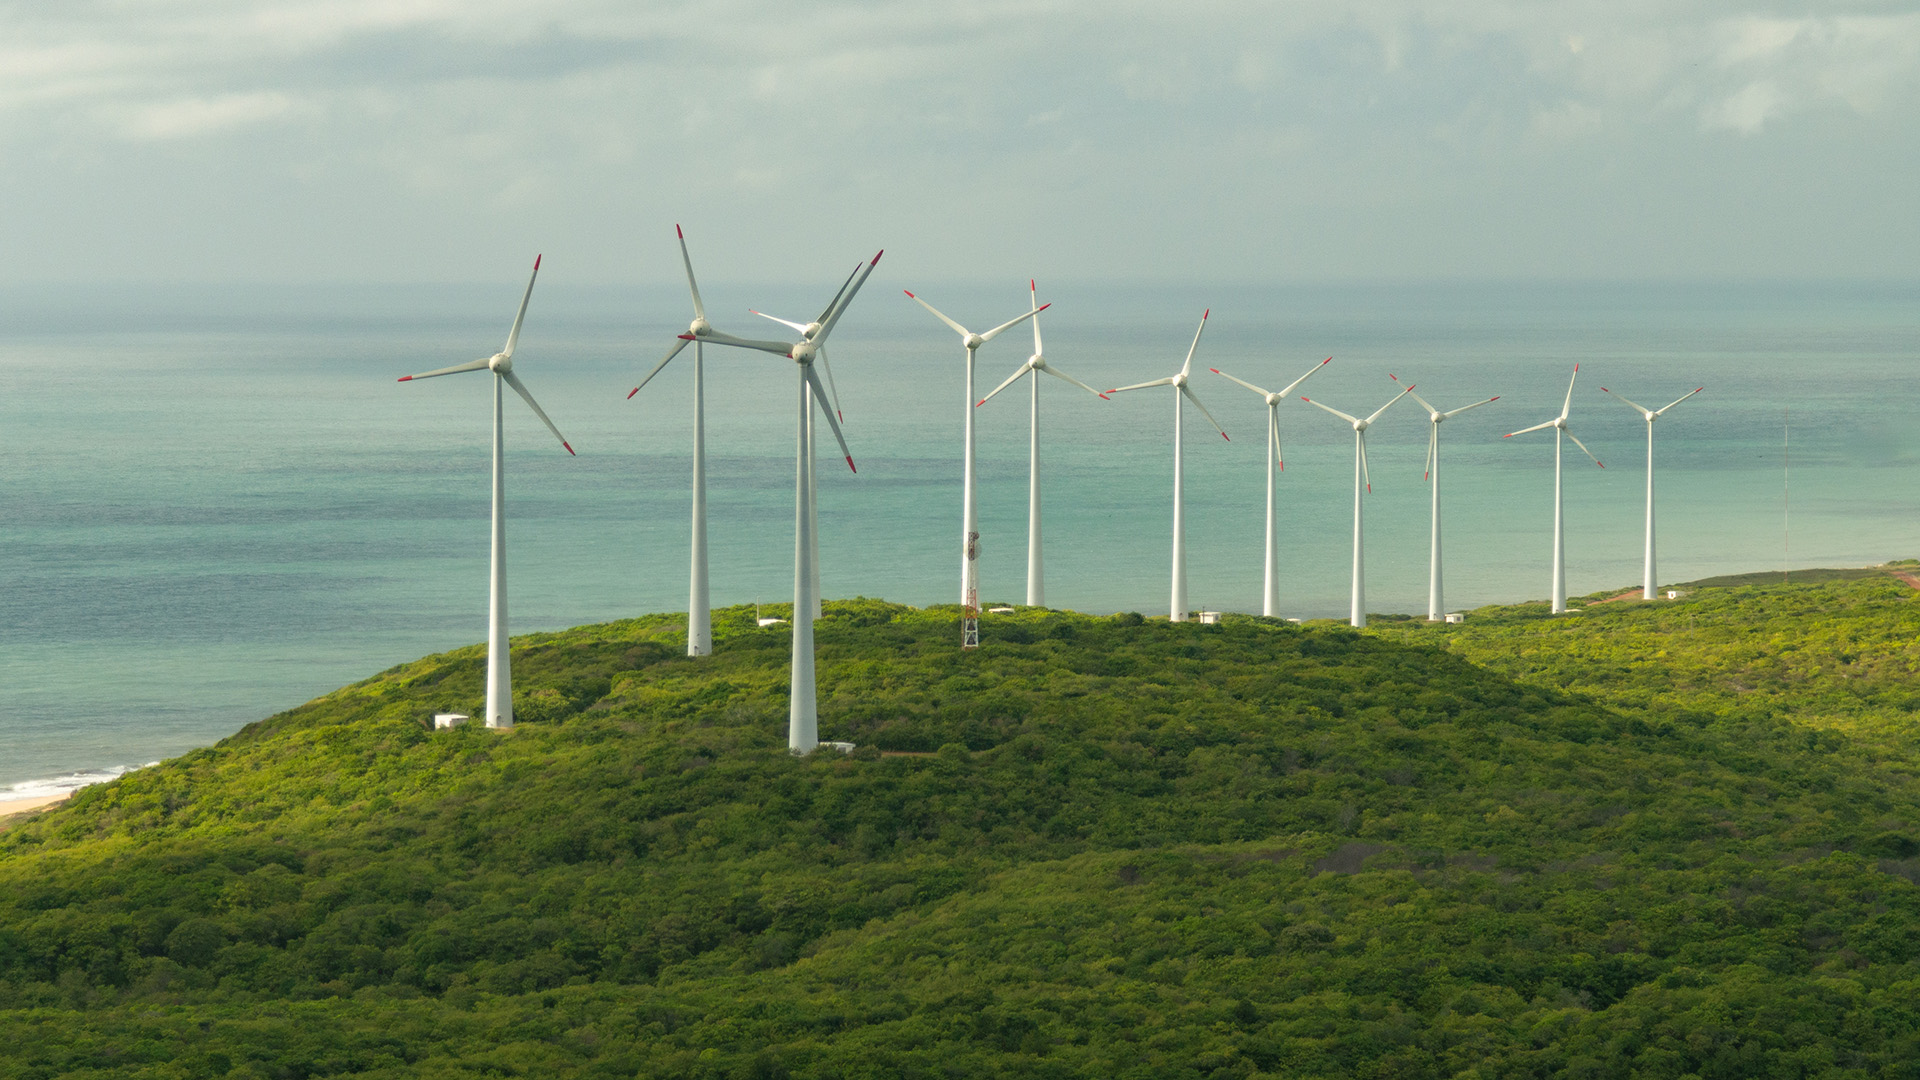 Wind farms in Brazil are encroaching on traditional community land